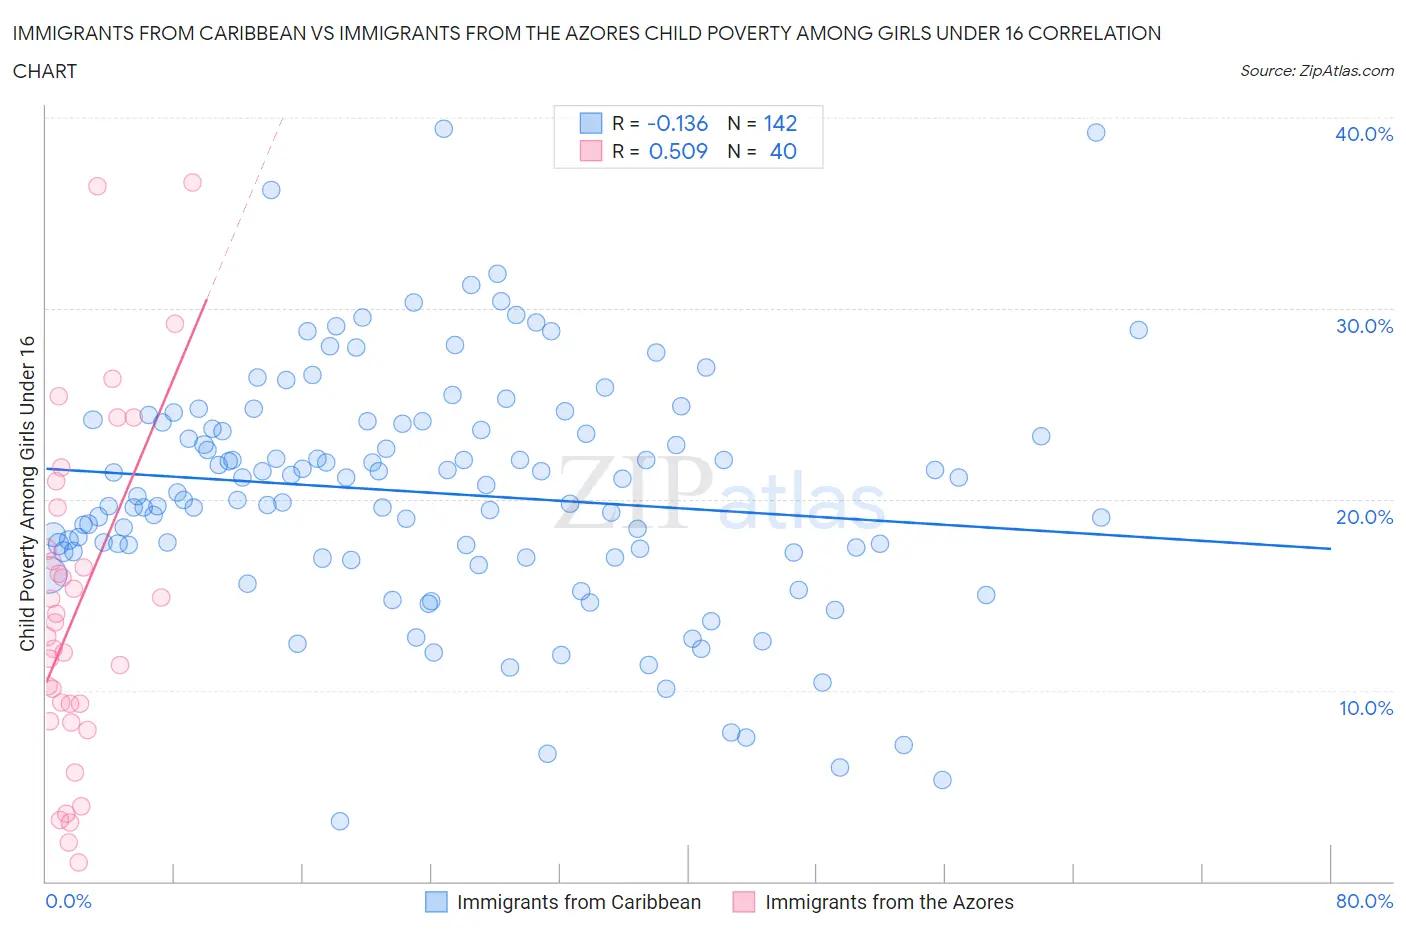 Immigrants from Caribbean vs Immigrants from the Azores Child Poverty Among Girls Under 16